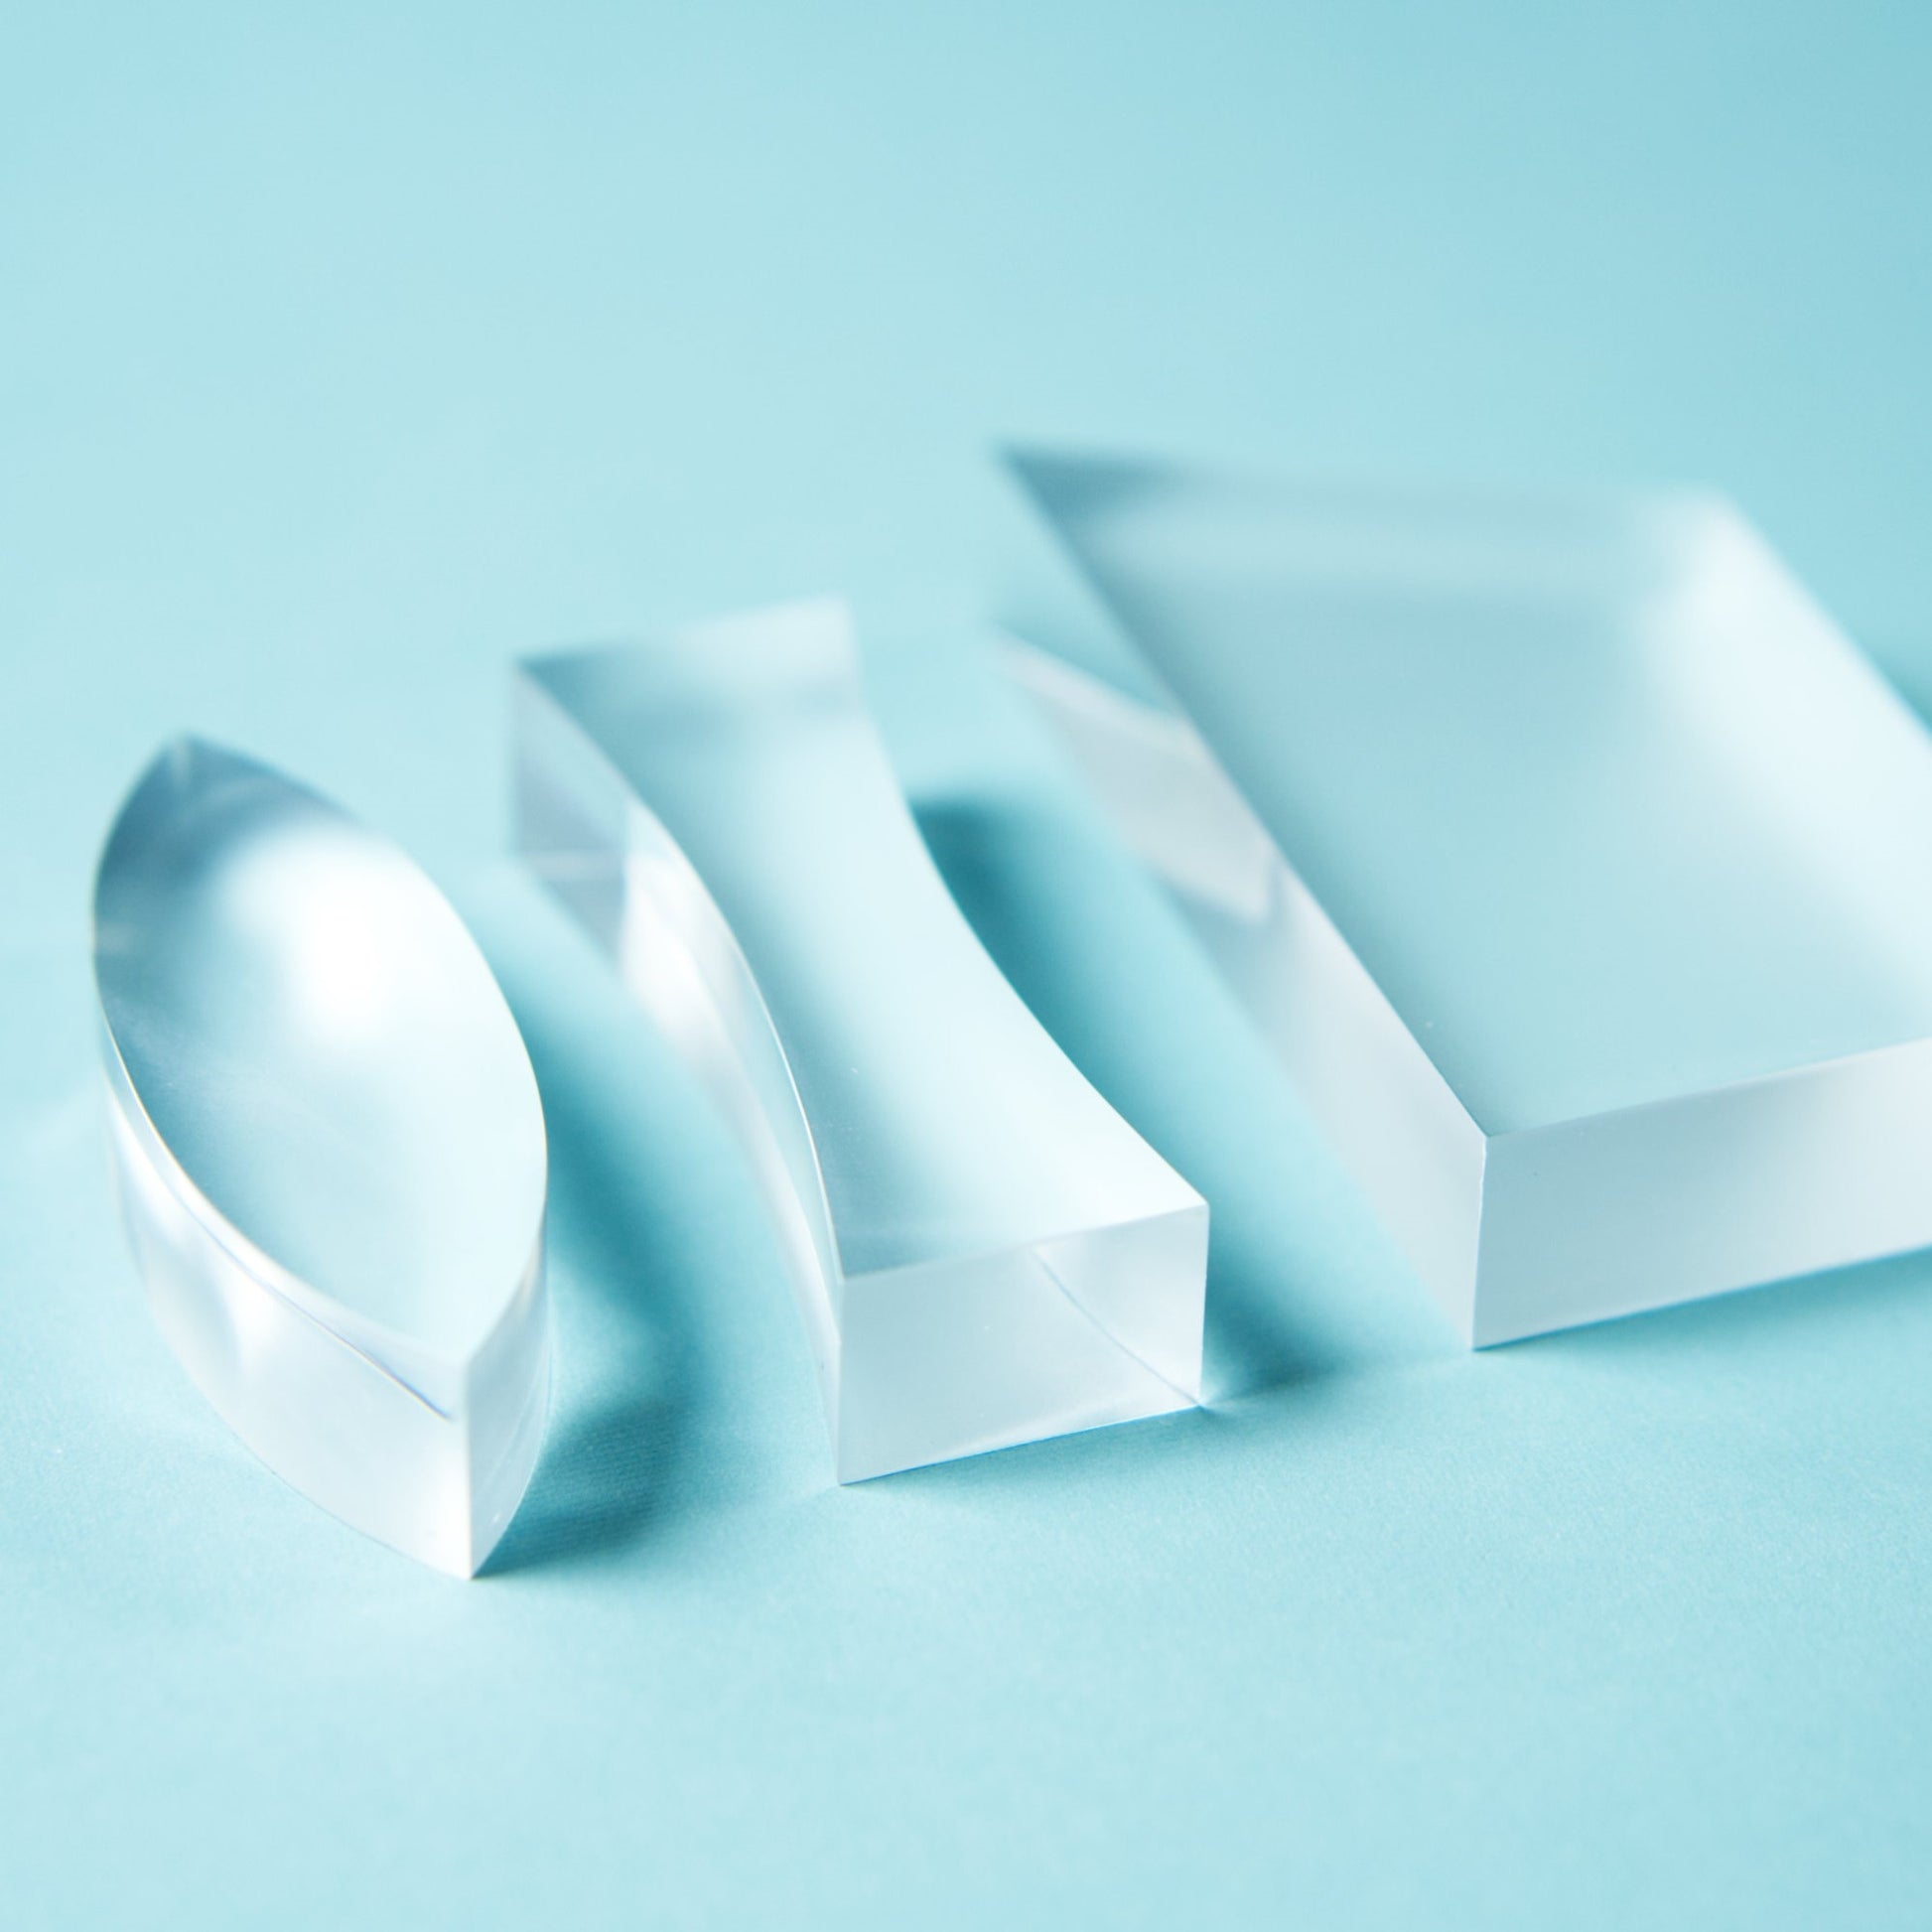 a set of three clear acrylic lenses for STEM optics experiments of refraction. One double concave lens, double convex lens, and trapezoidal prism lens